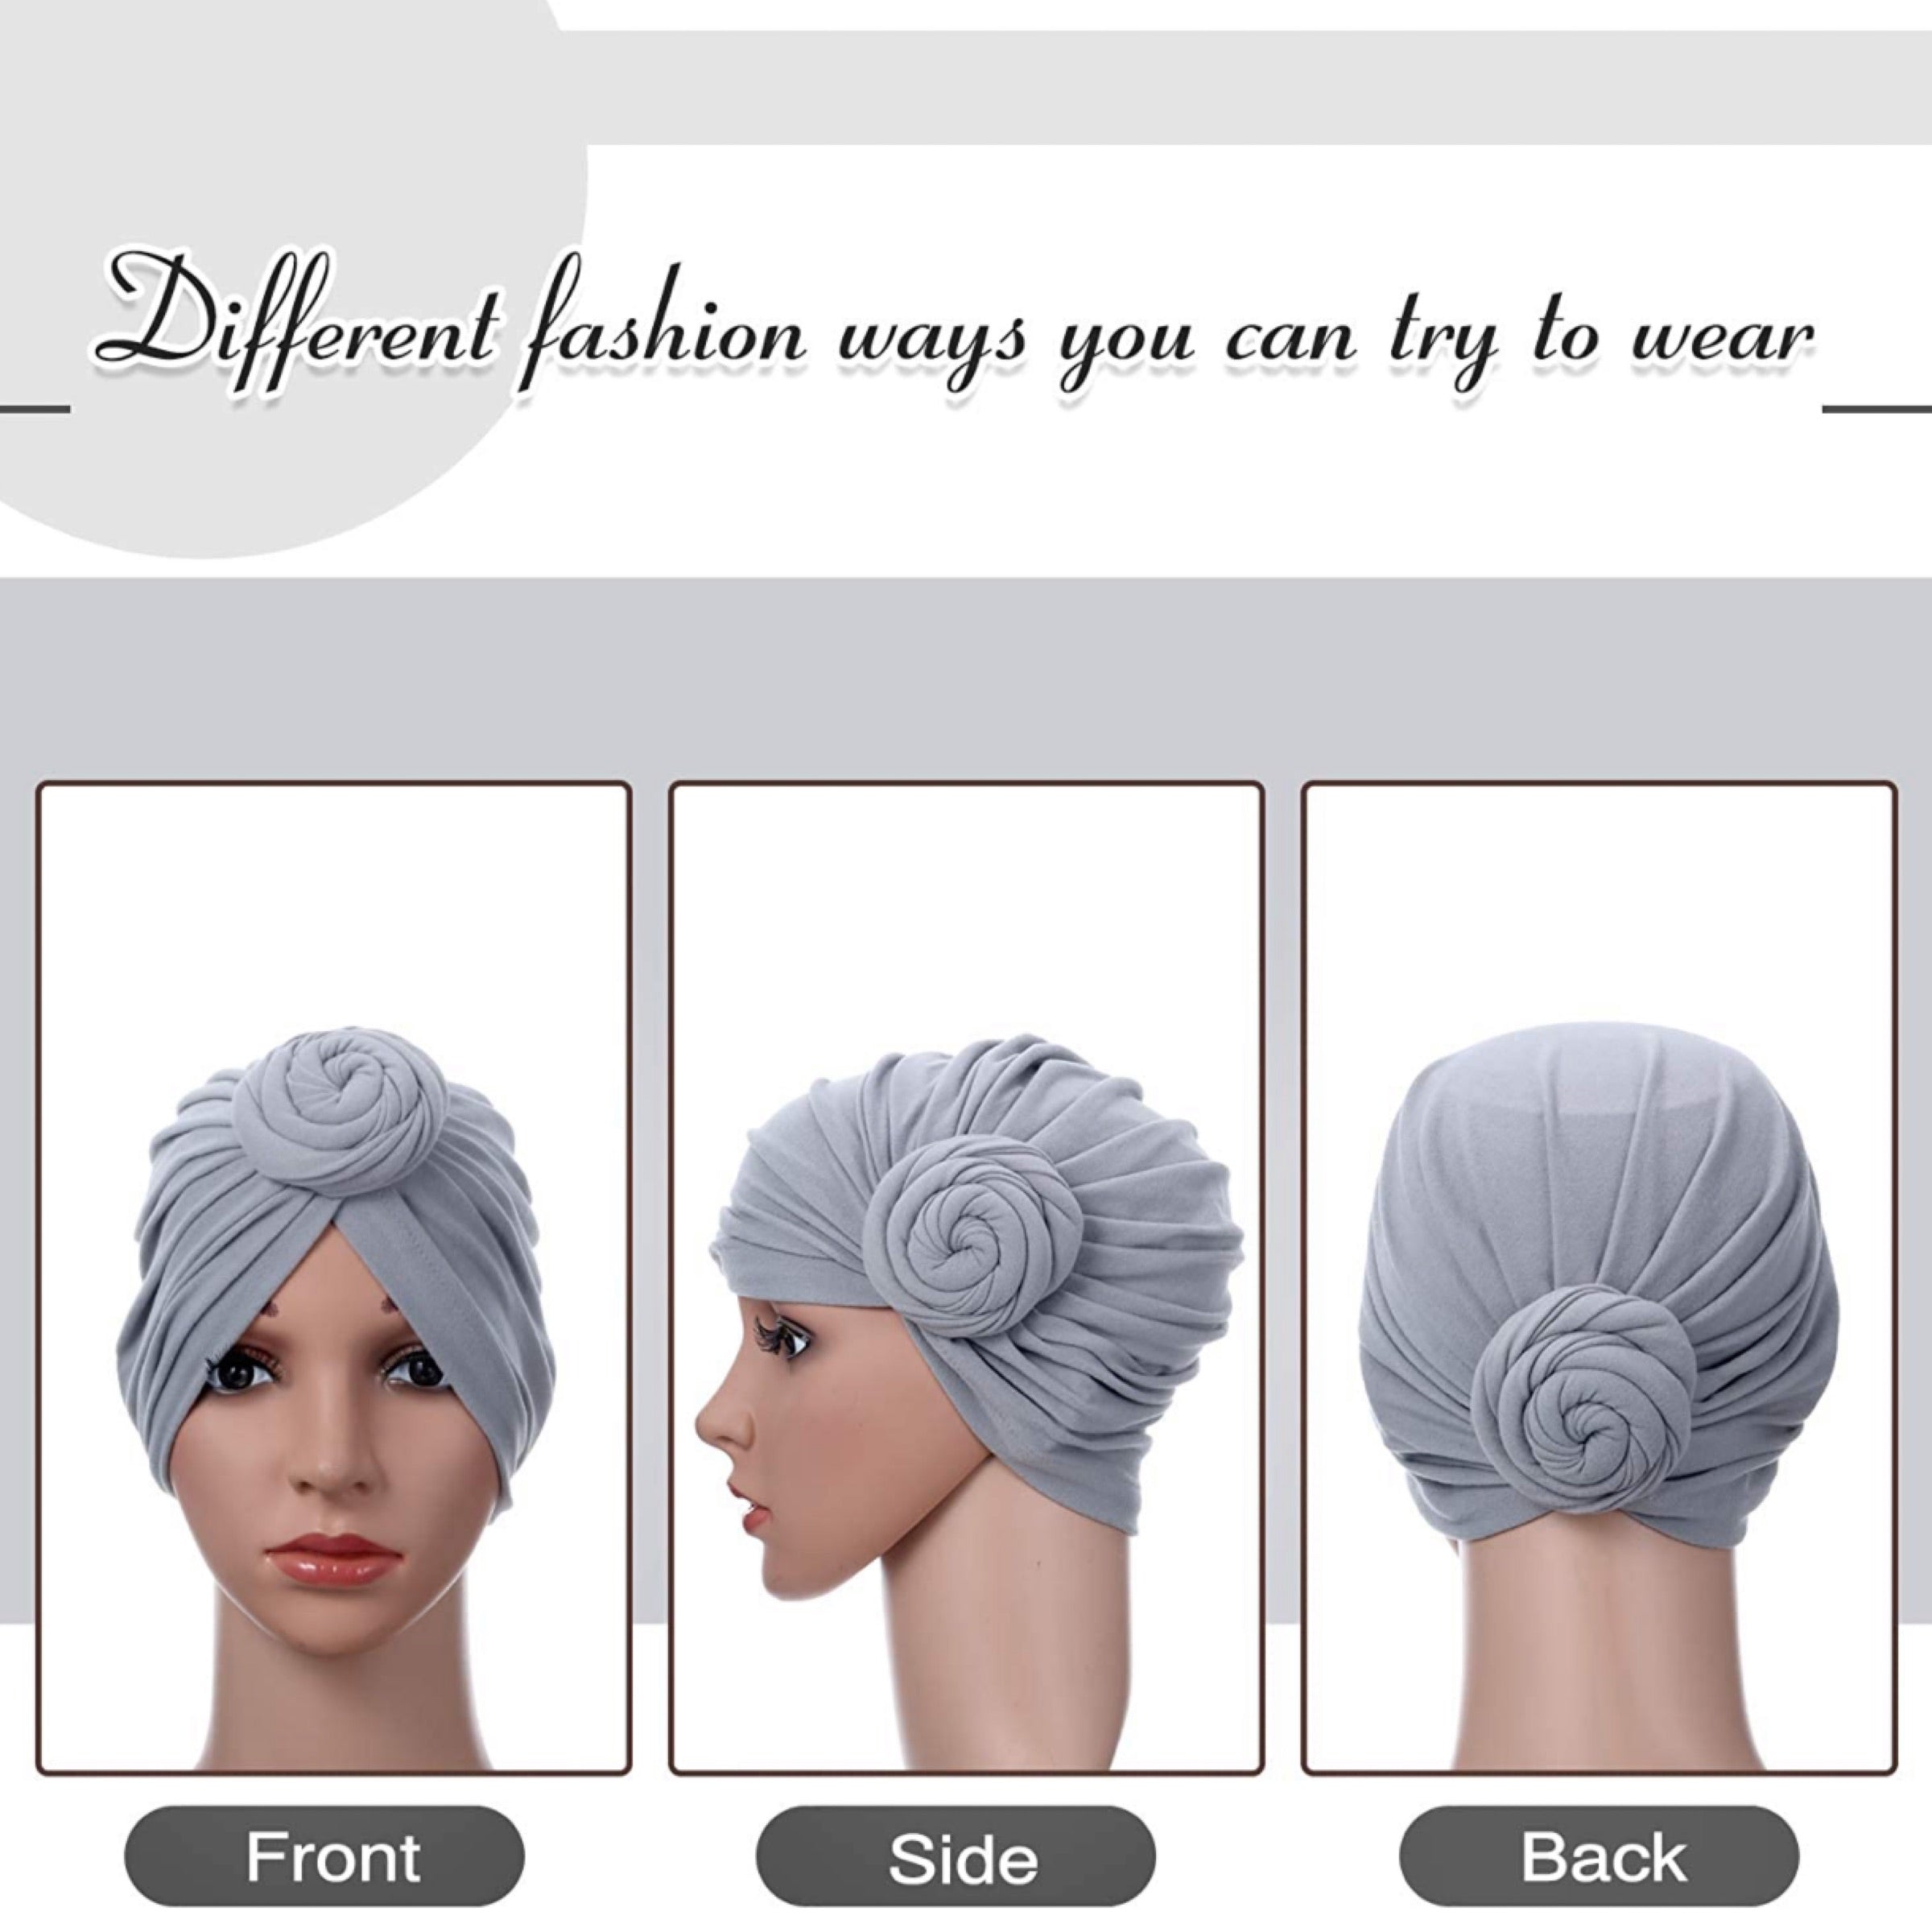 Top knots 1 - knotted turbins